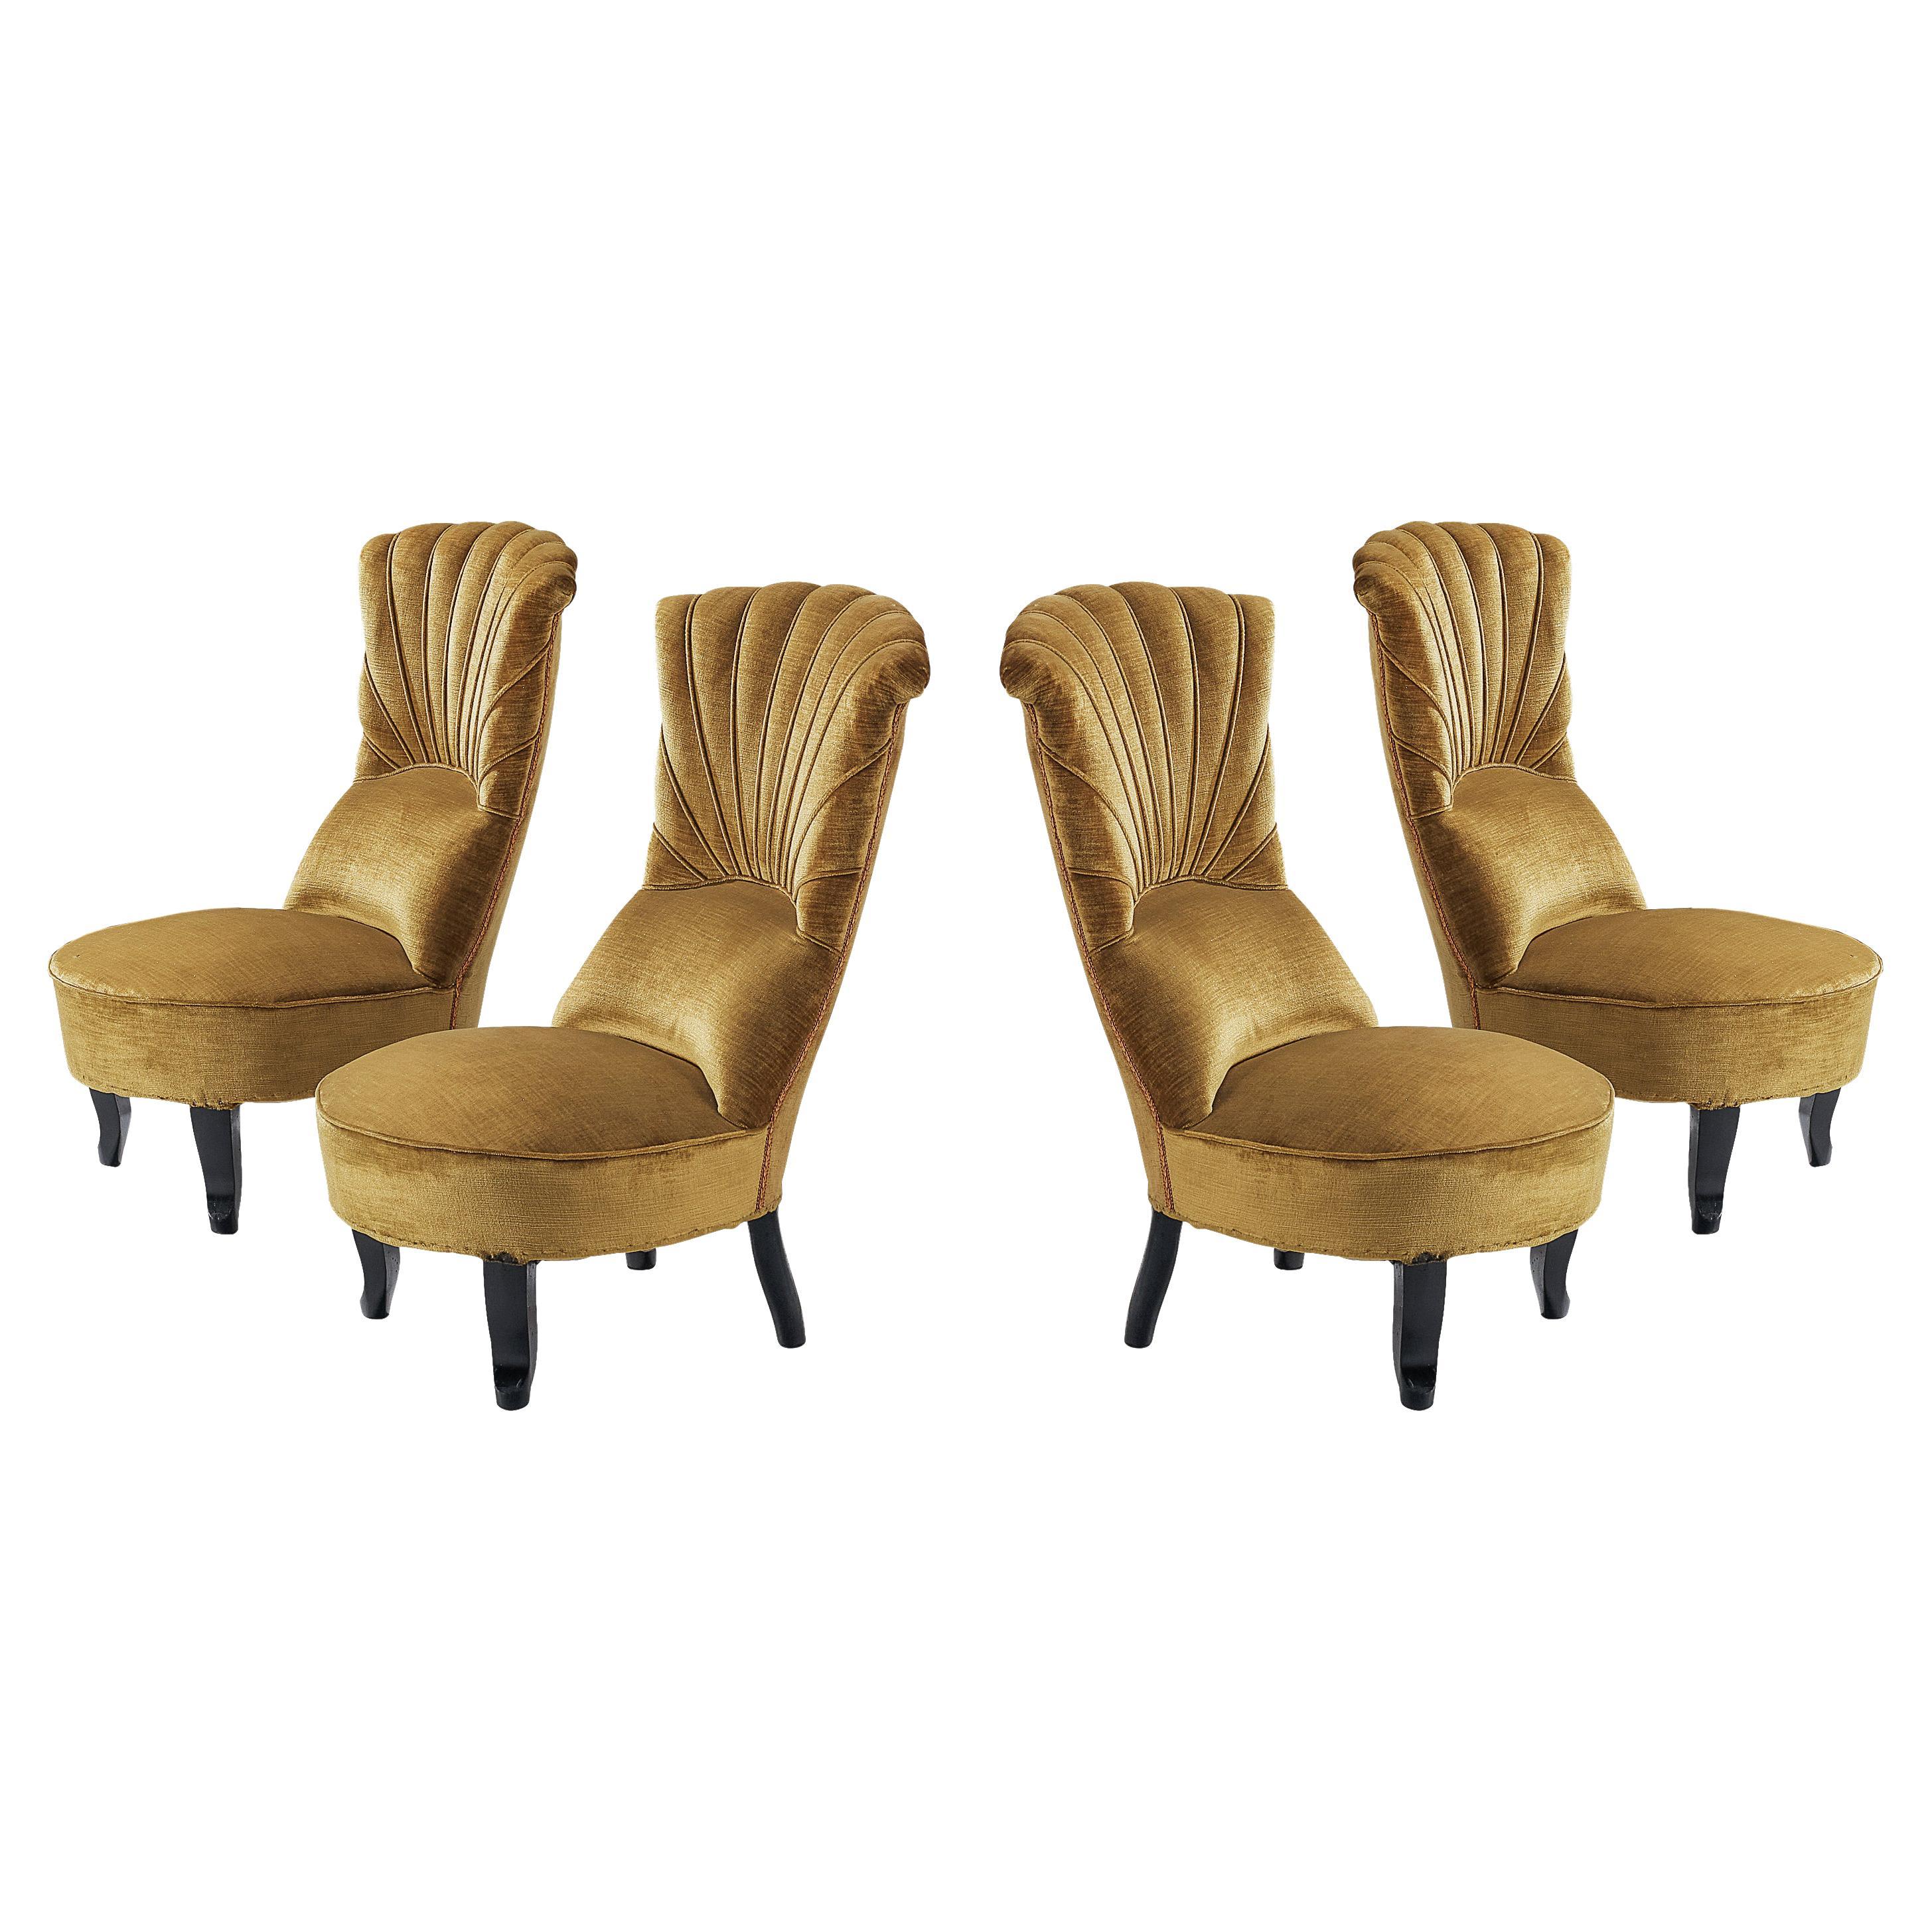 Art Deco Low Side Chairs in Mustard Velours Fabric For Sale